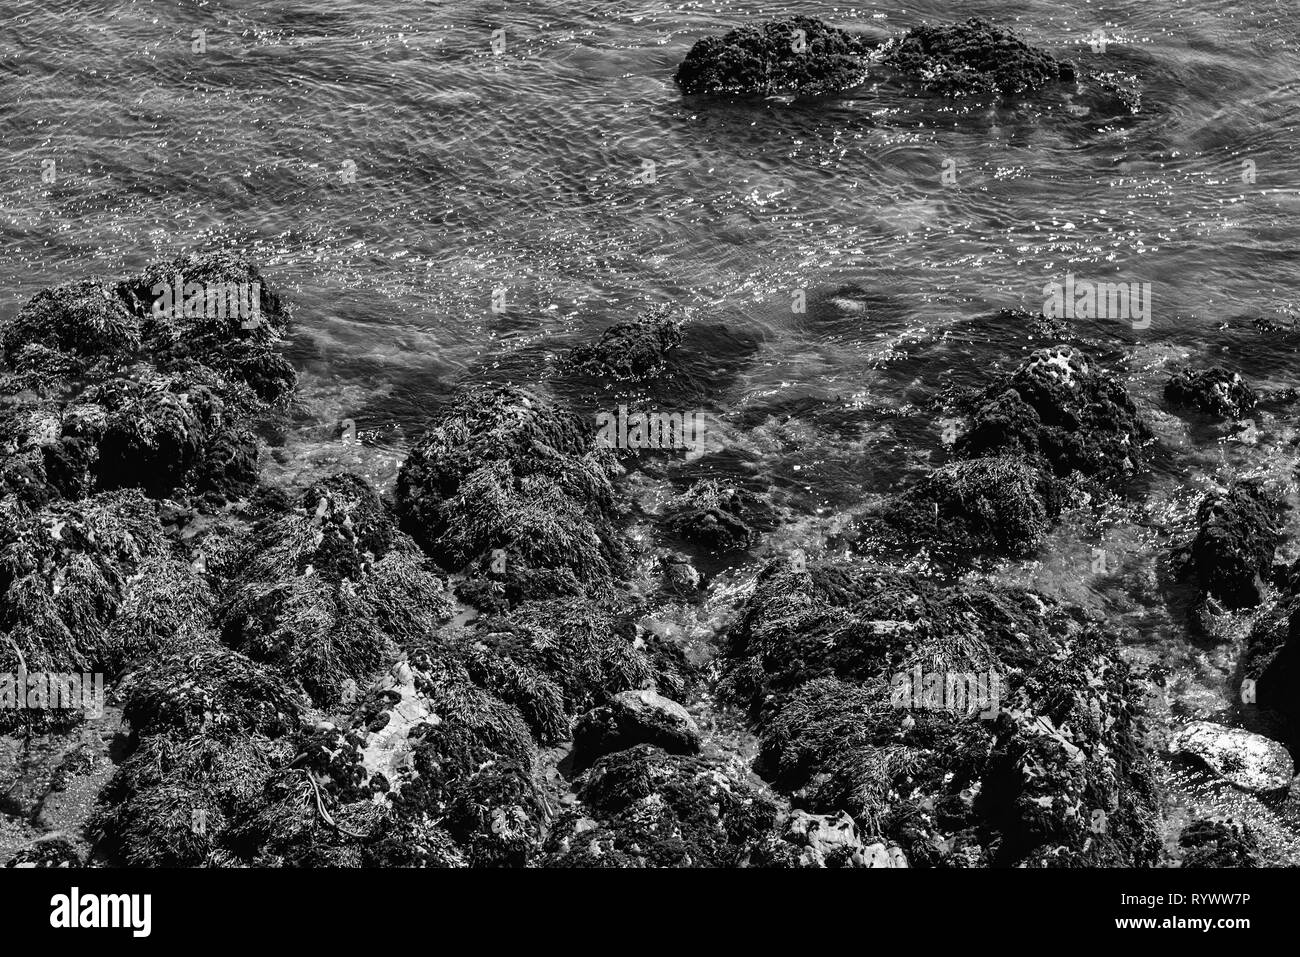 Black and white, ocean and waves on rocky shore. Stock Photo